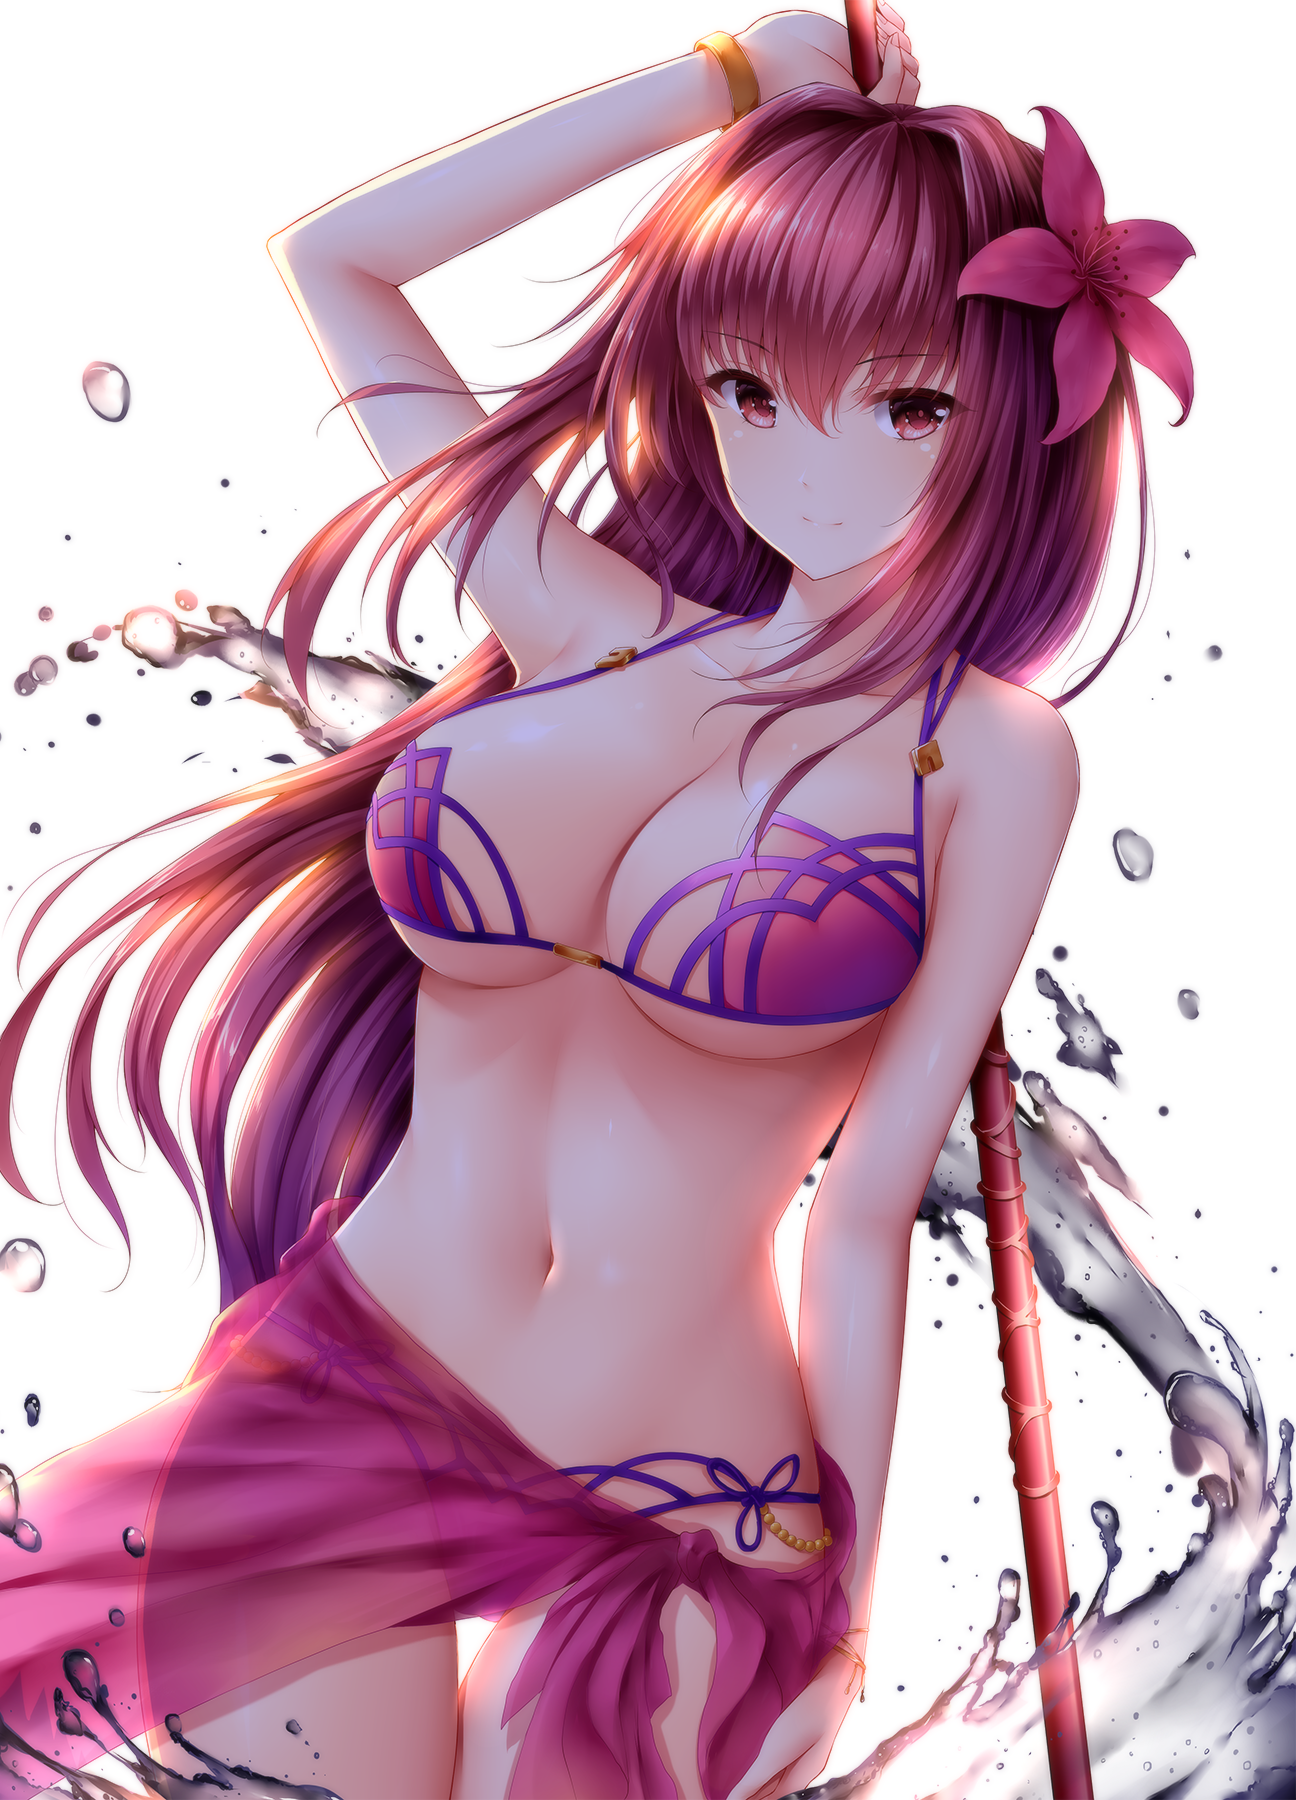 Anime 1296x1800 cleavage white background boobs bikini Fate/Grand Order Scathach see-through clothing underboob weapon wsman artwork anime girls Fate series standing